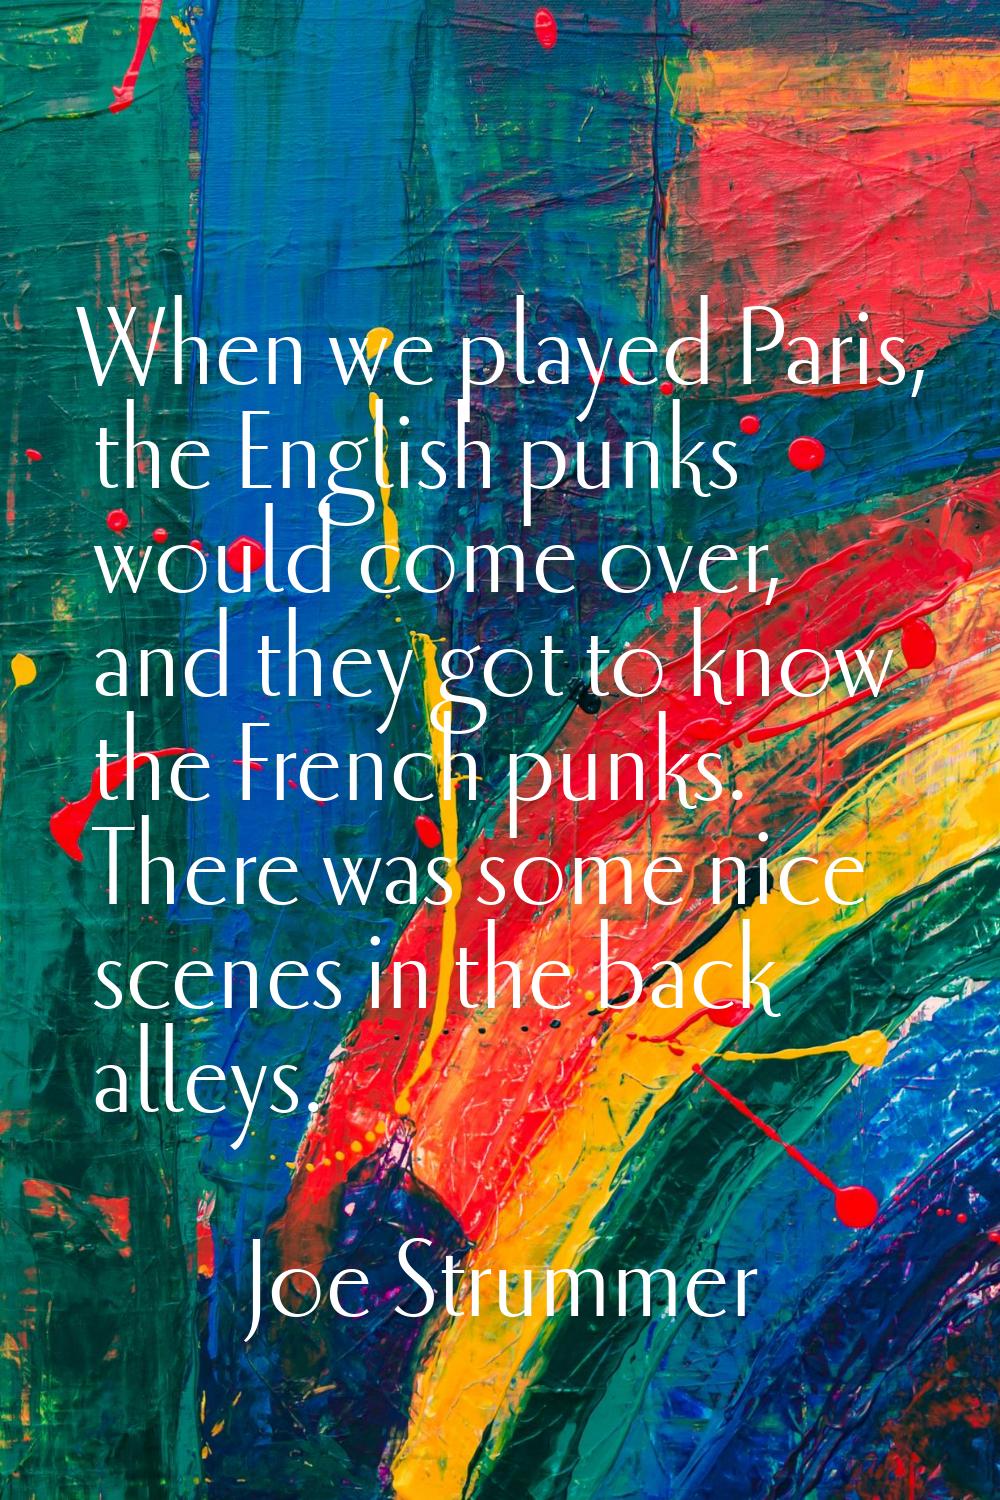 When we played Paris, the English punks would come over, and they got to know the French punks. The